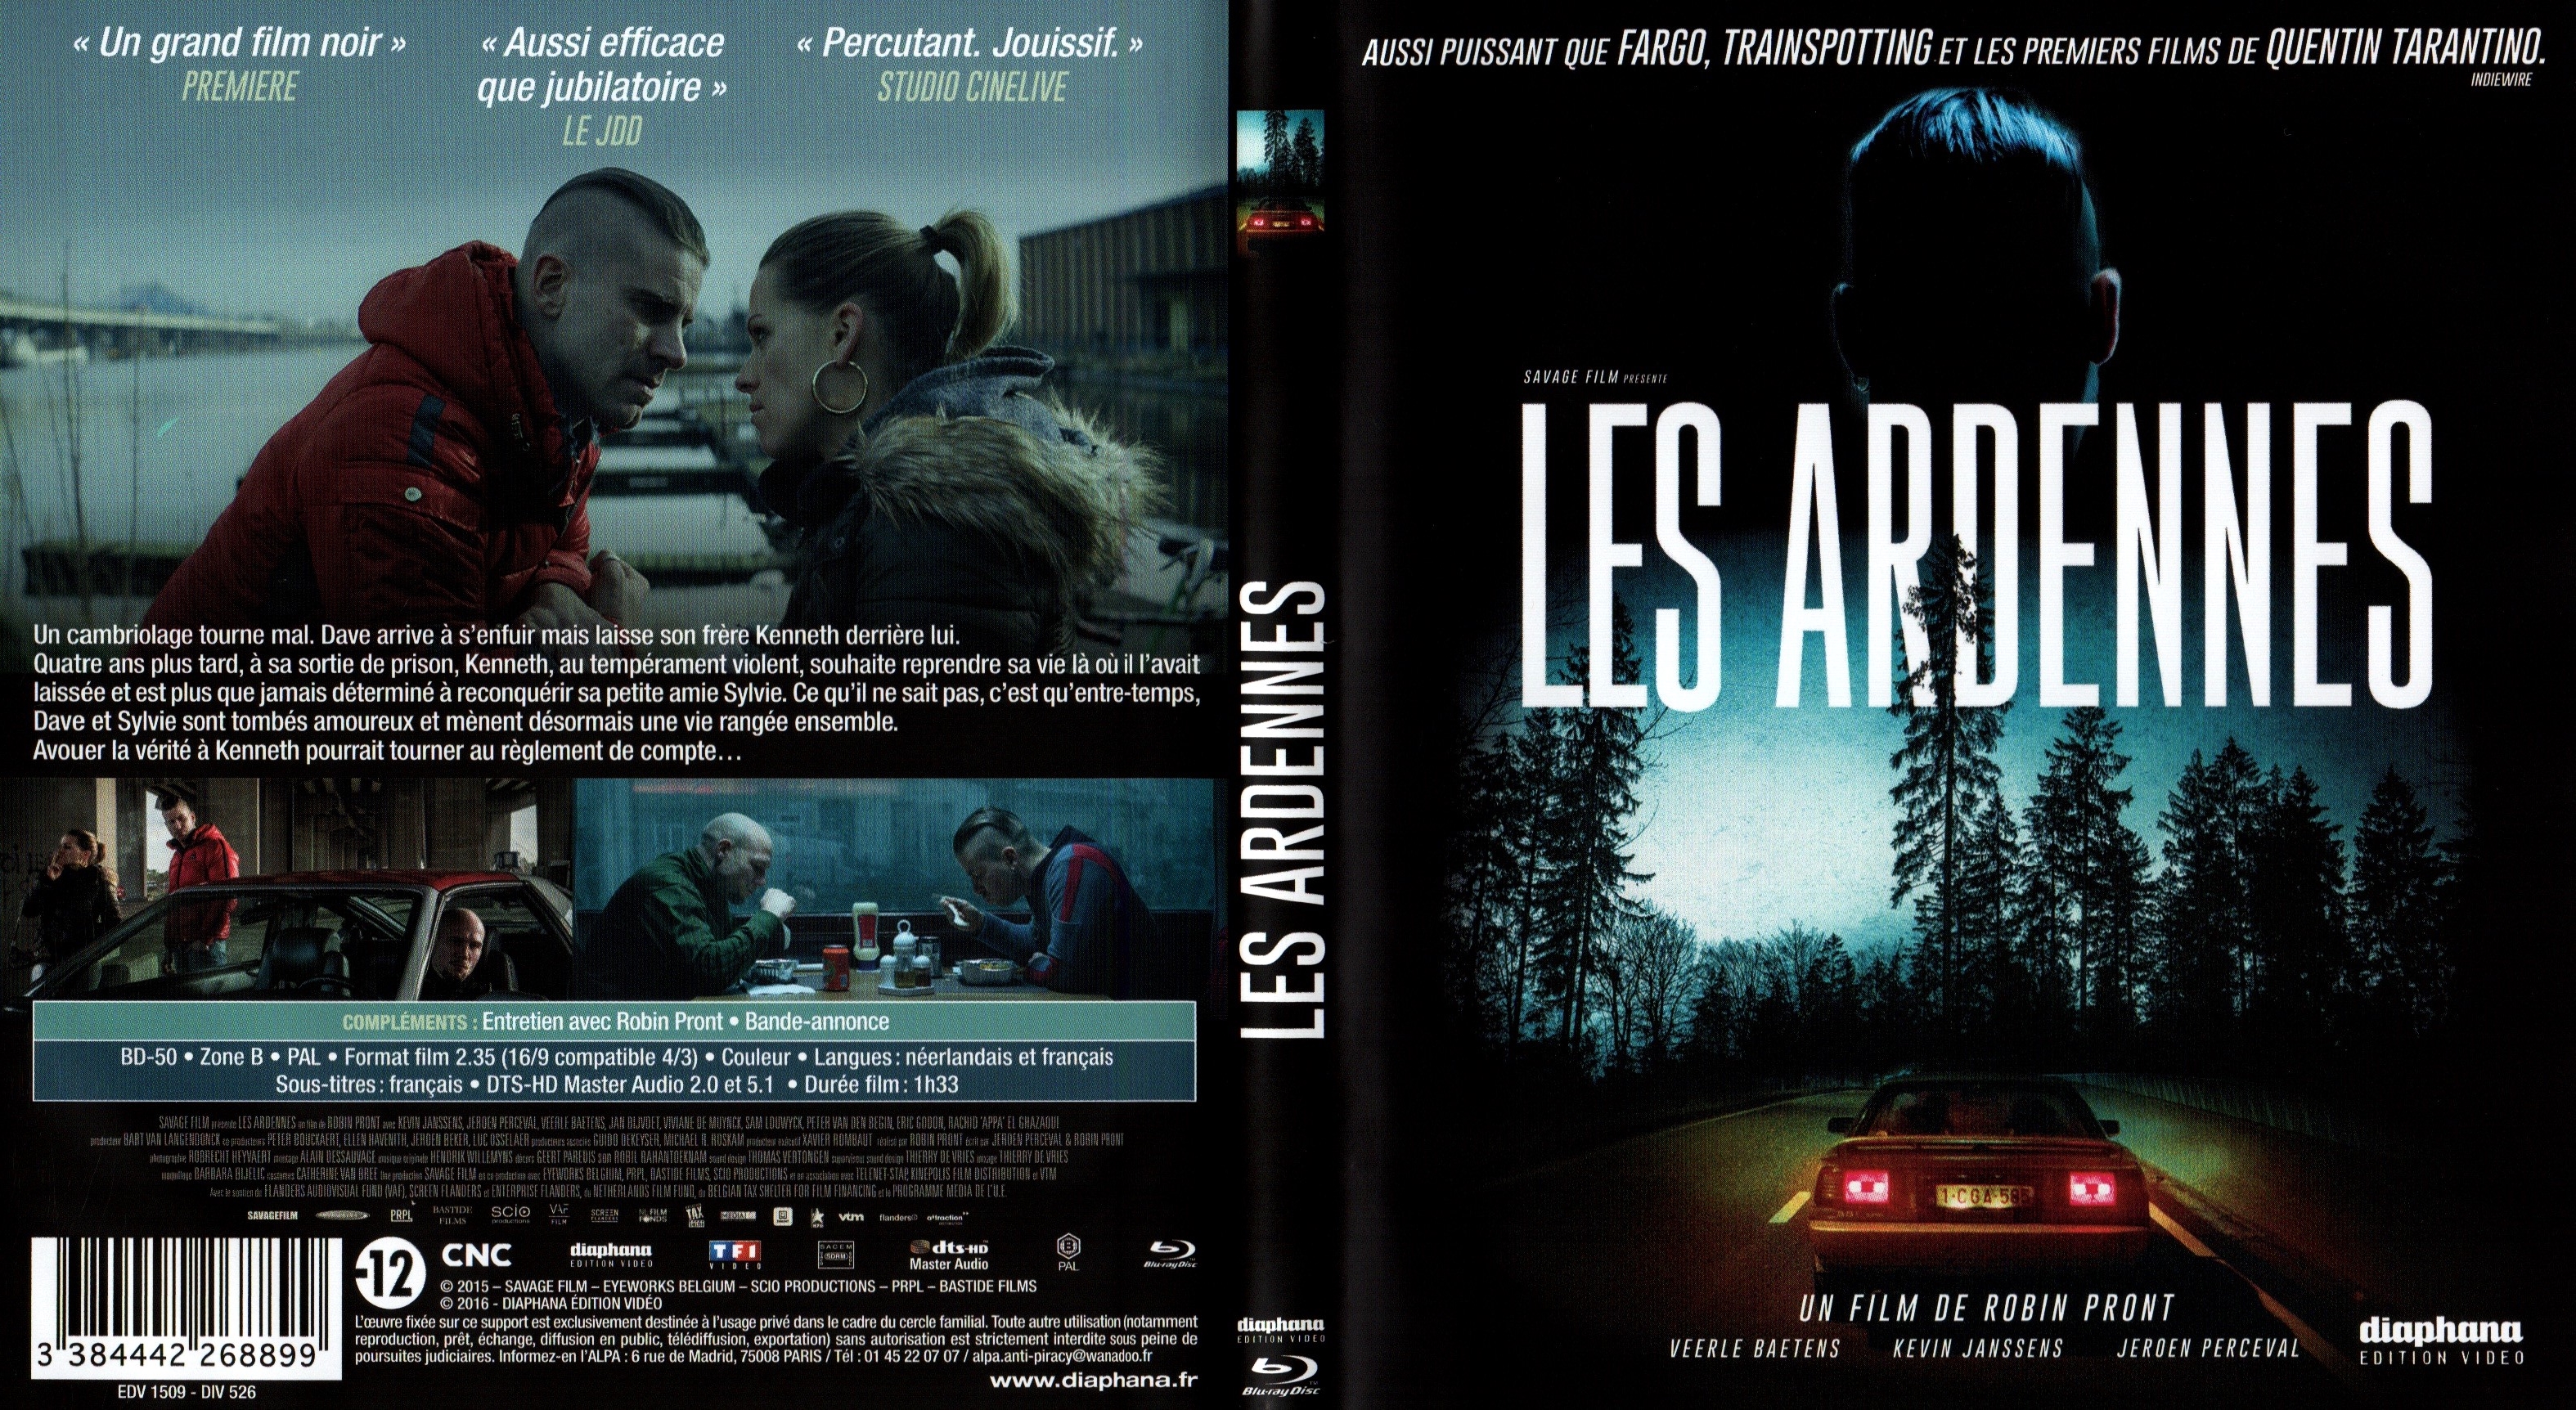 Jaquette DVD Les Ardennes (BLU-RAY)